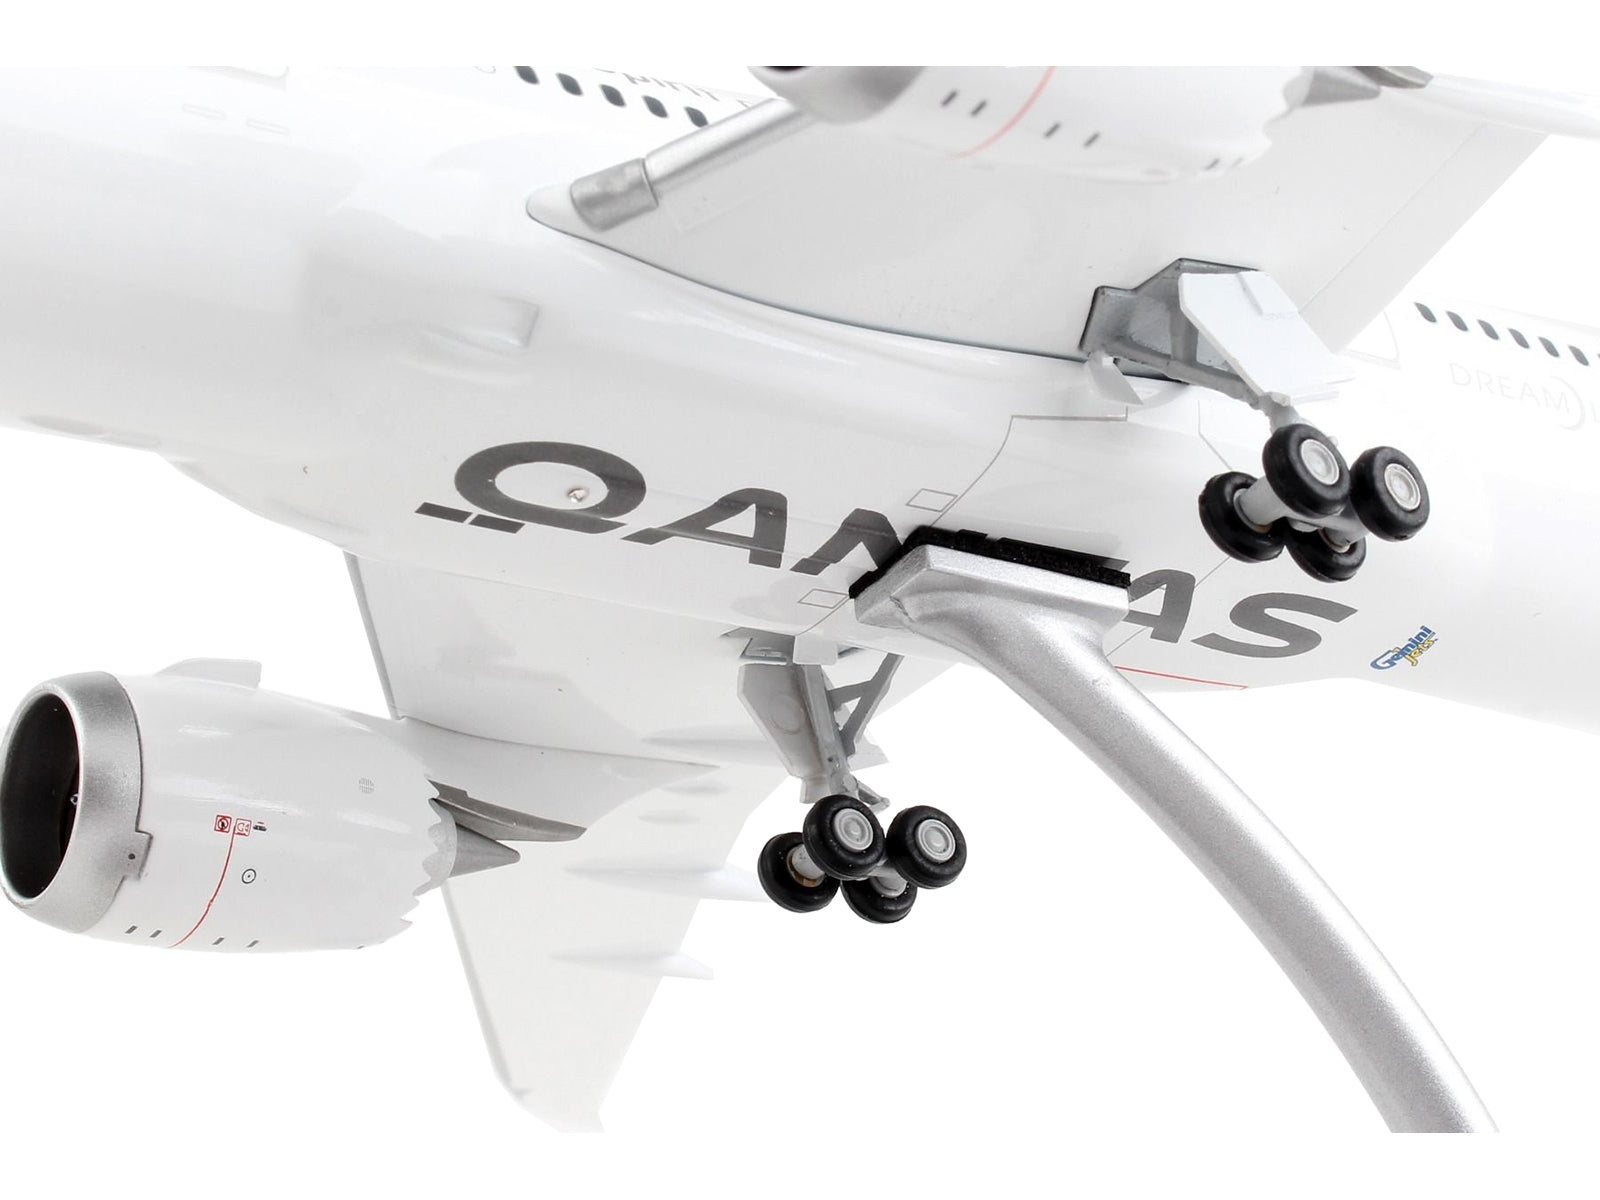 Boeing 787-9 Commercial Aircraft "Qantas Airways - Spirit of Australia" White with Red Tail